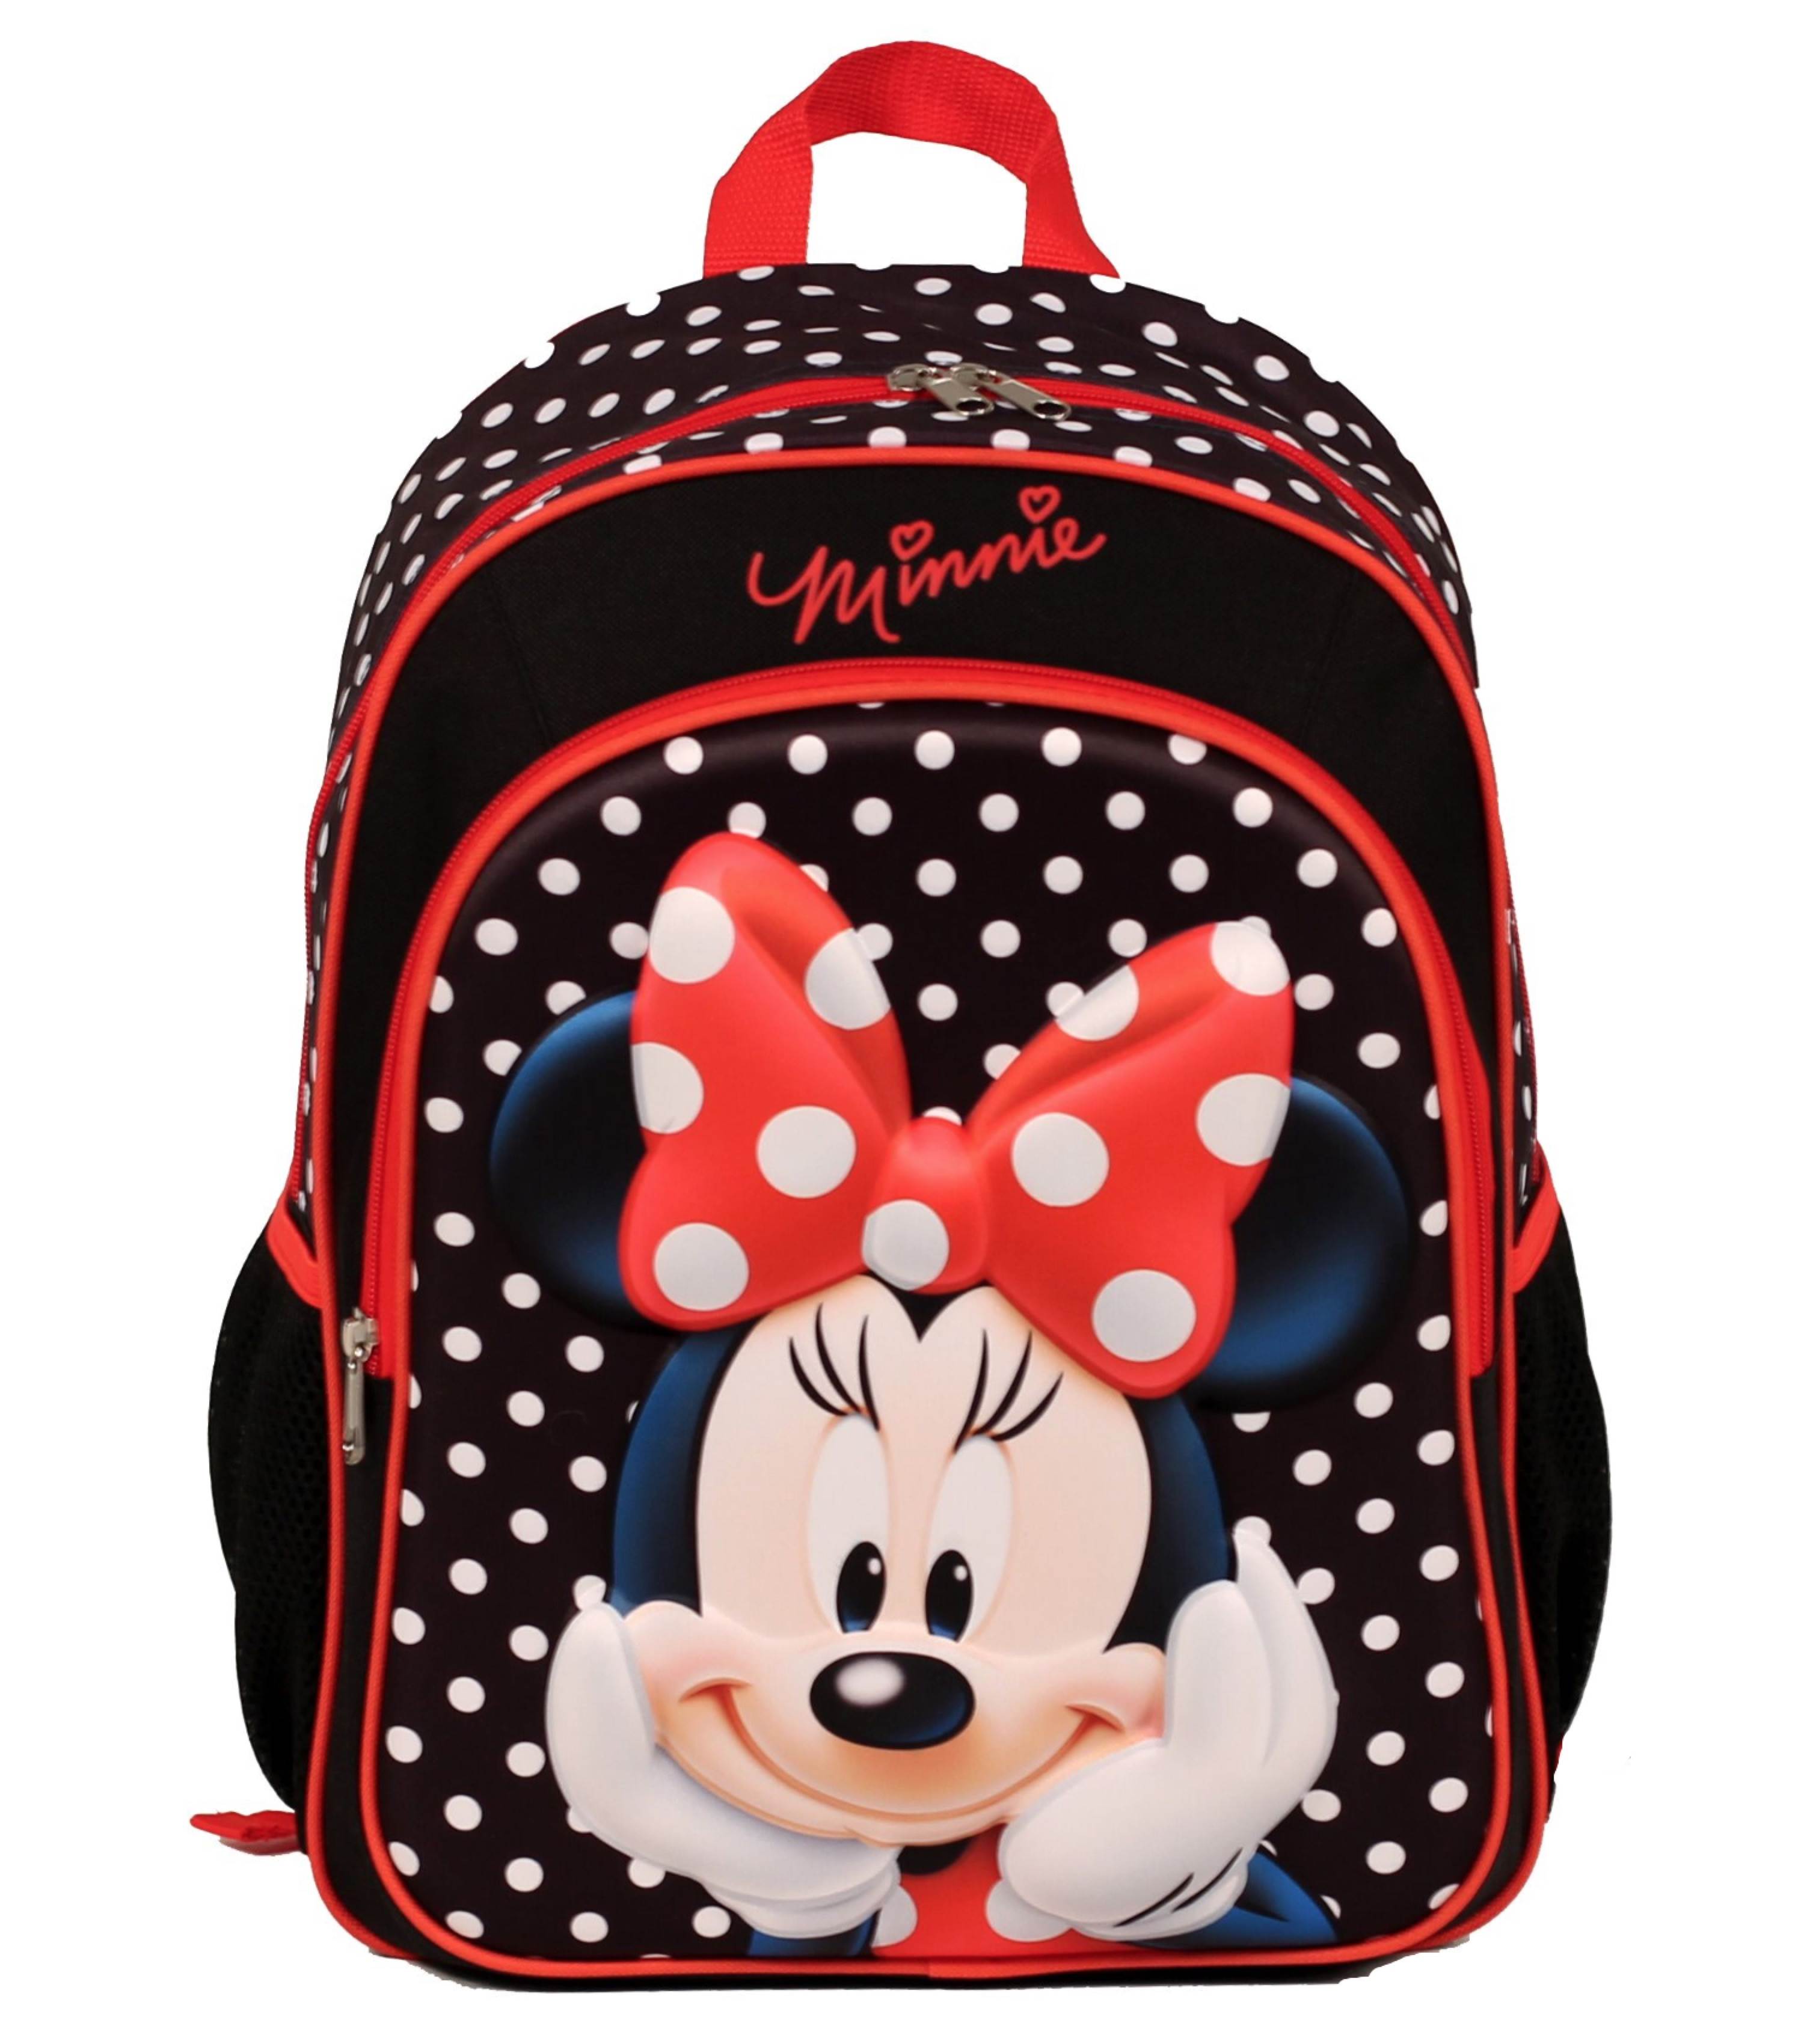 1 Disney Junior Minnie Dots Adorable Backpack With Front Zipper Pocket # 20089 